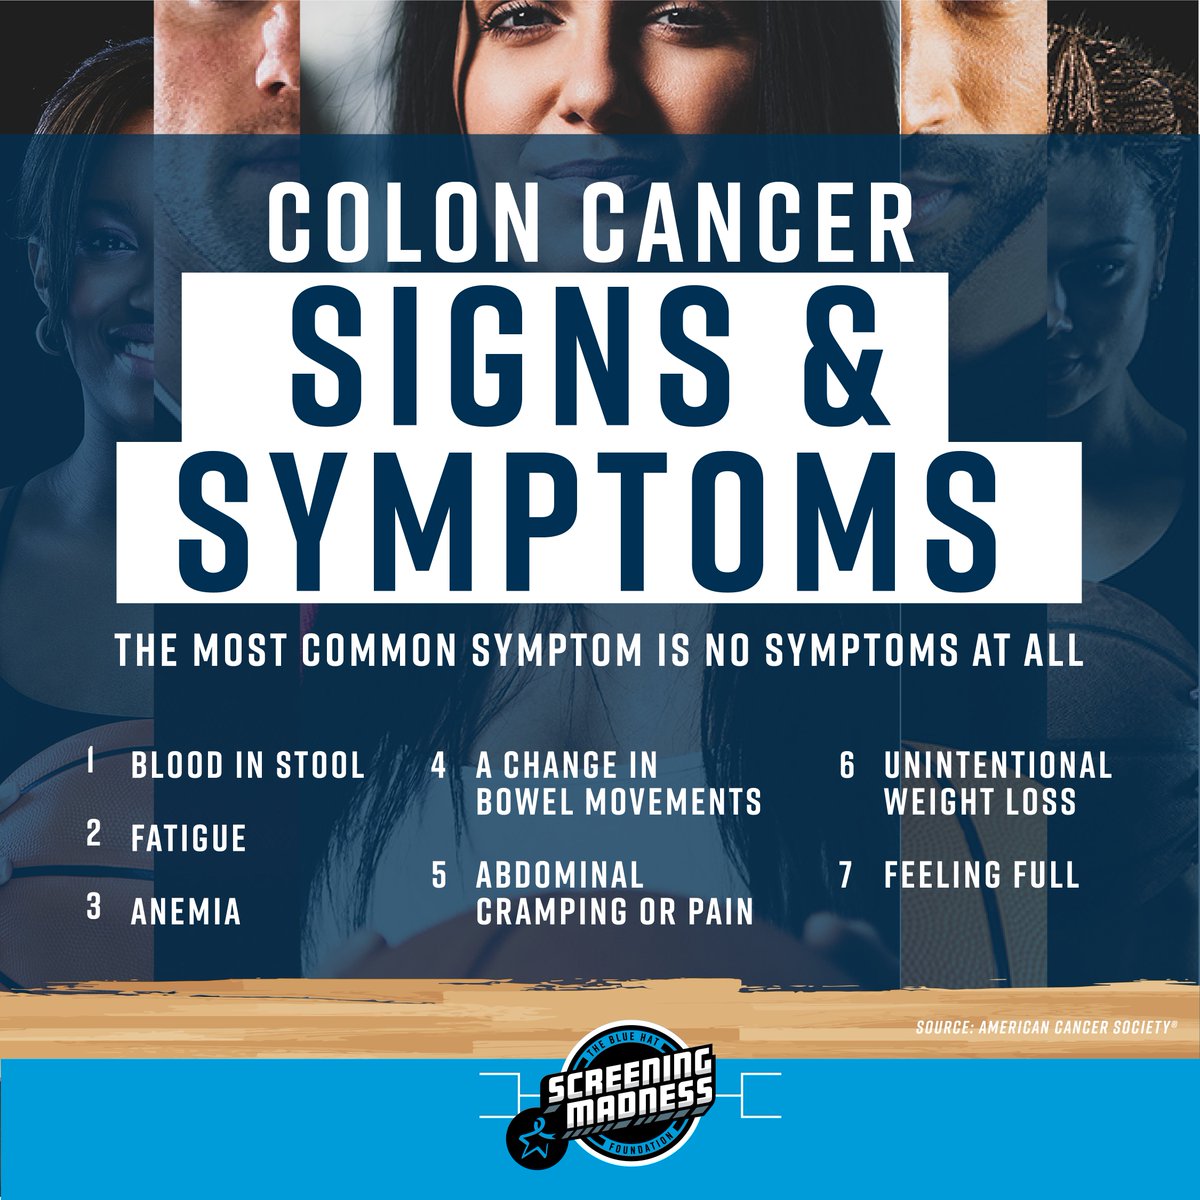 Did you know 1 in 23 men and 1 in 25 women will develop colorectal cancer? Make the pledge and commit to get screened, or encourage others to get screened, for #colorectalcancer. ow.ly/mPBK50IiN0g 
#ShowYourBlue #ScreeningMadness @BigTenCRC @BlueHats4colons